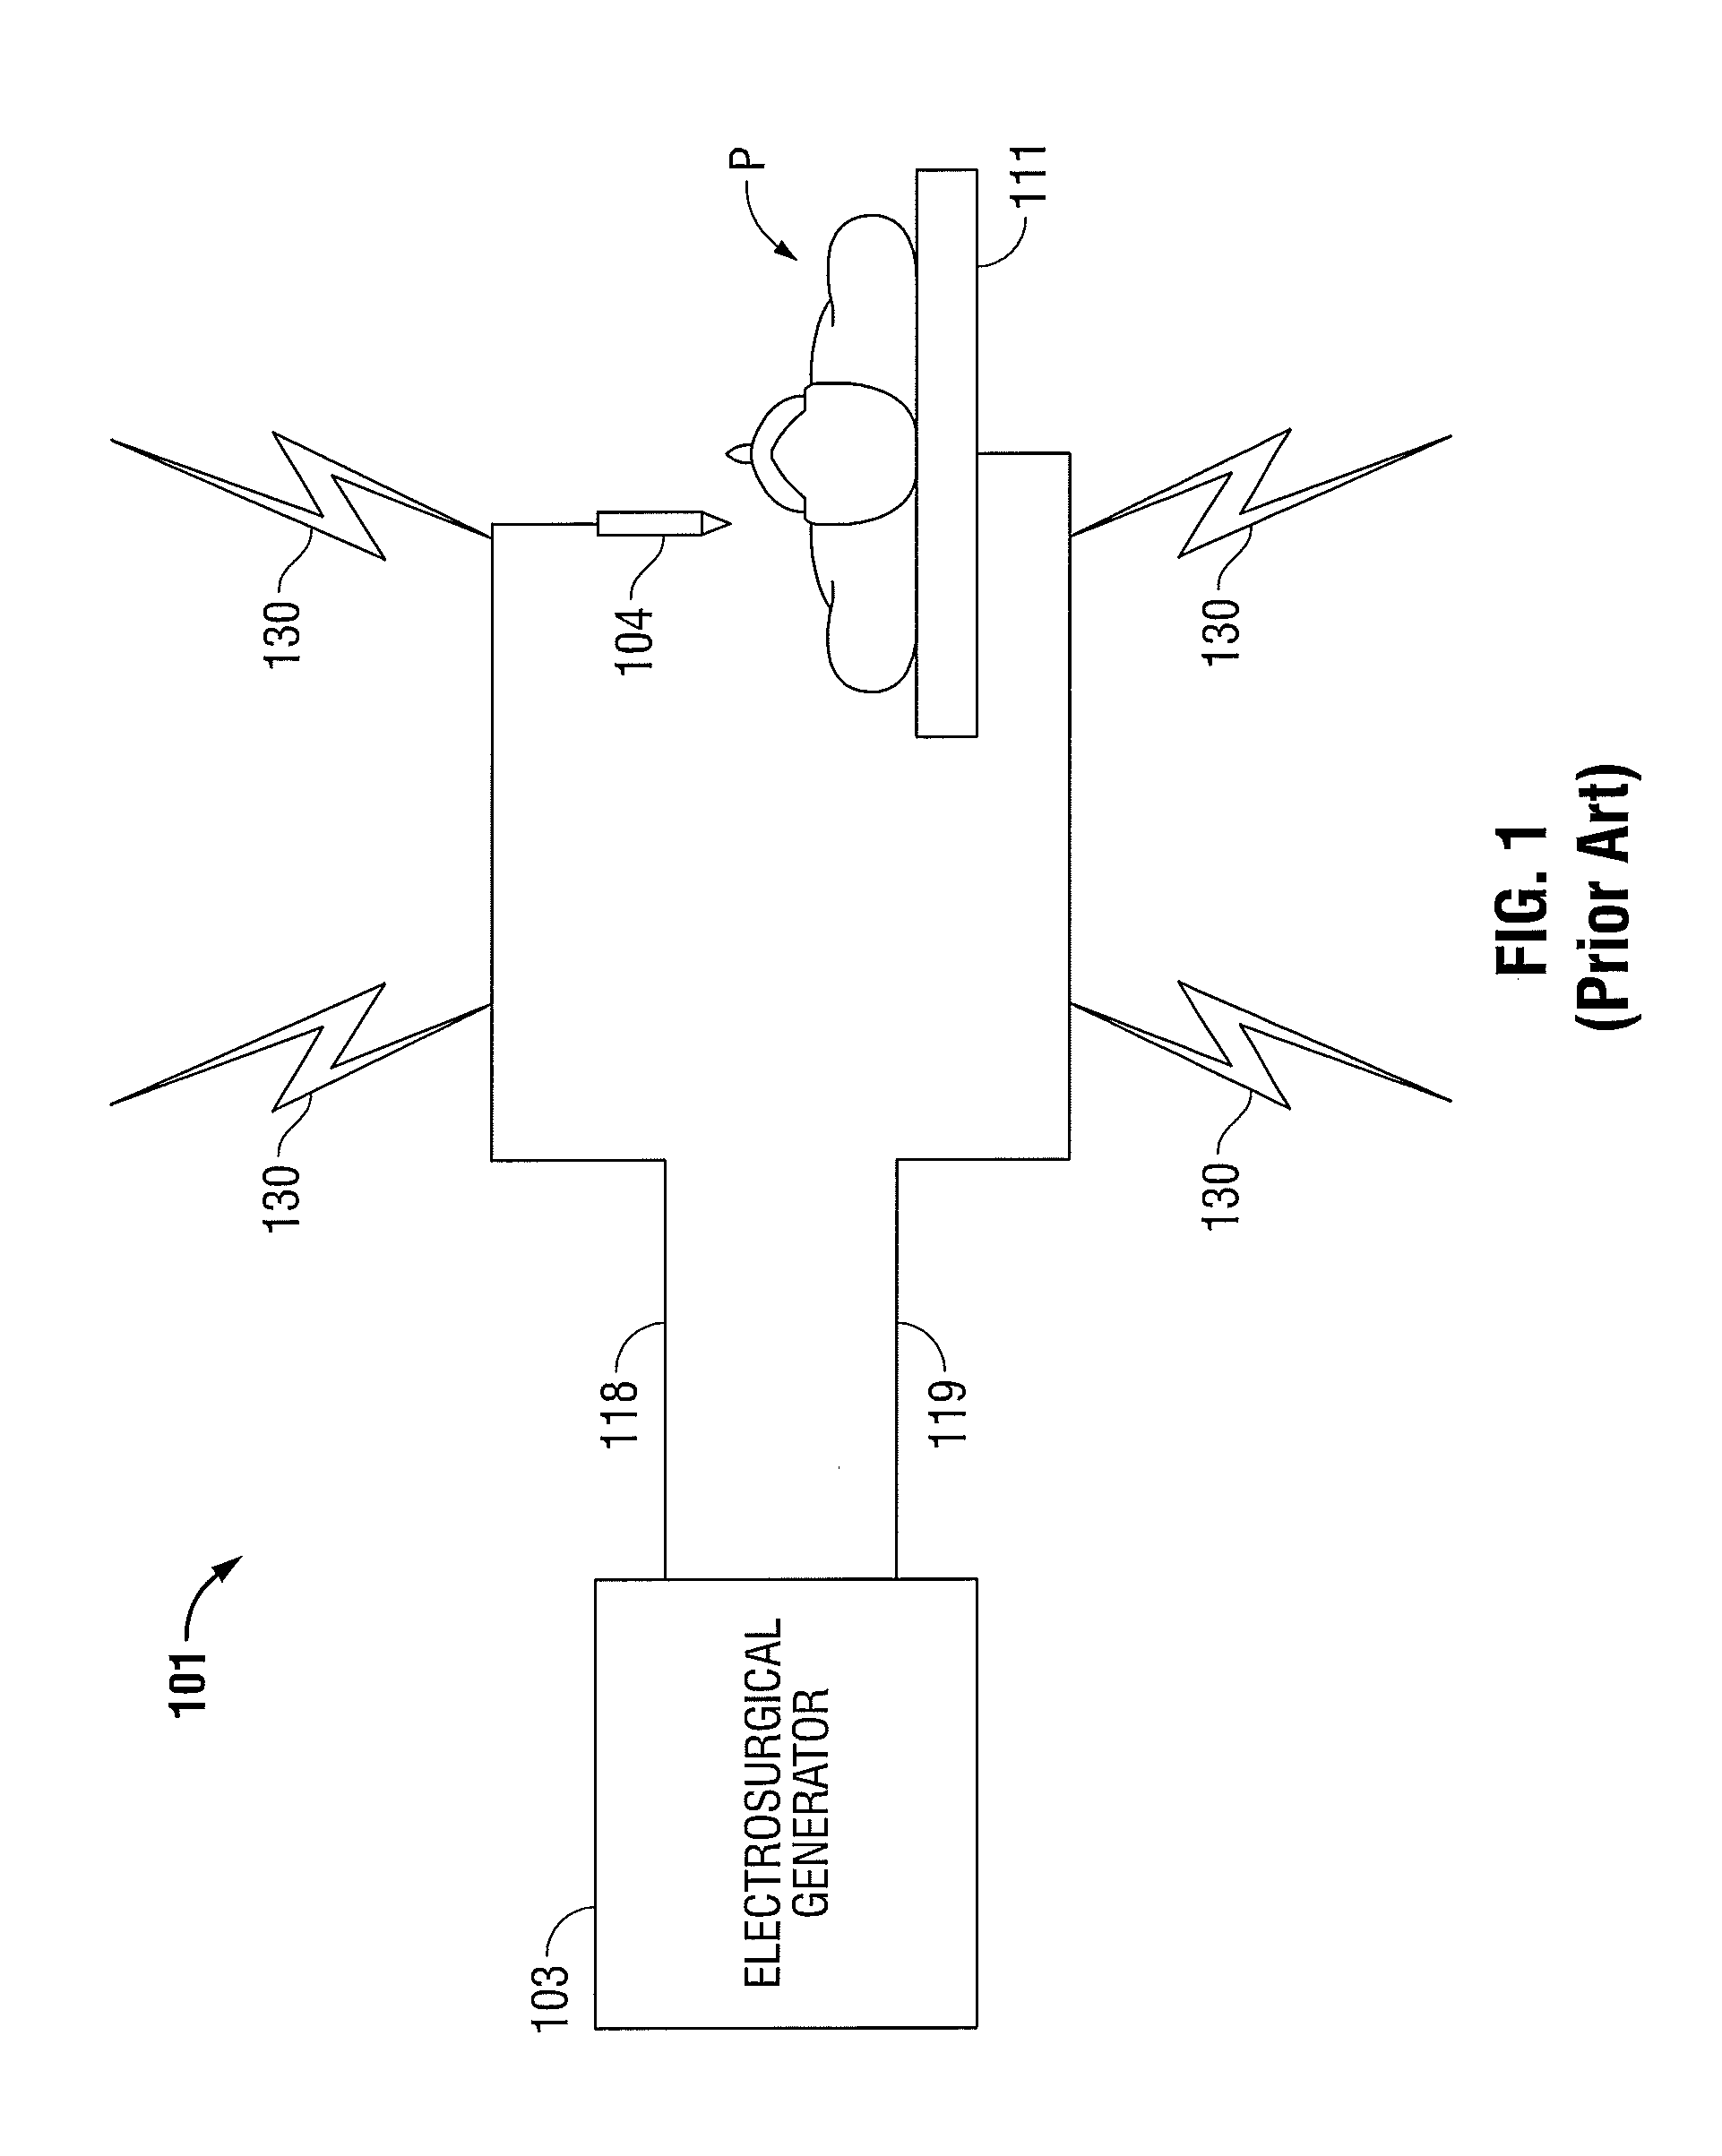 Electrosurgical Apparatus with Integrated Energy Sensing at Tissue Site